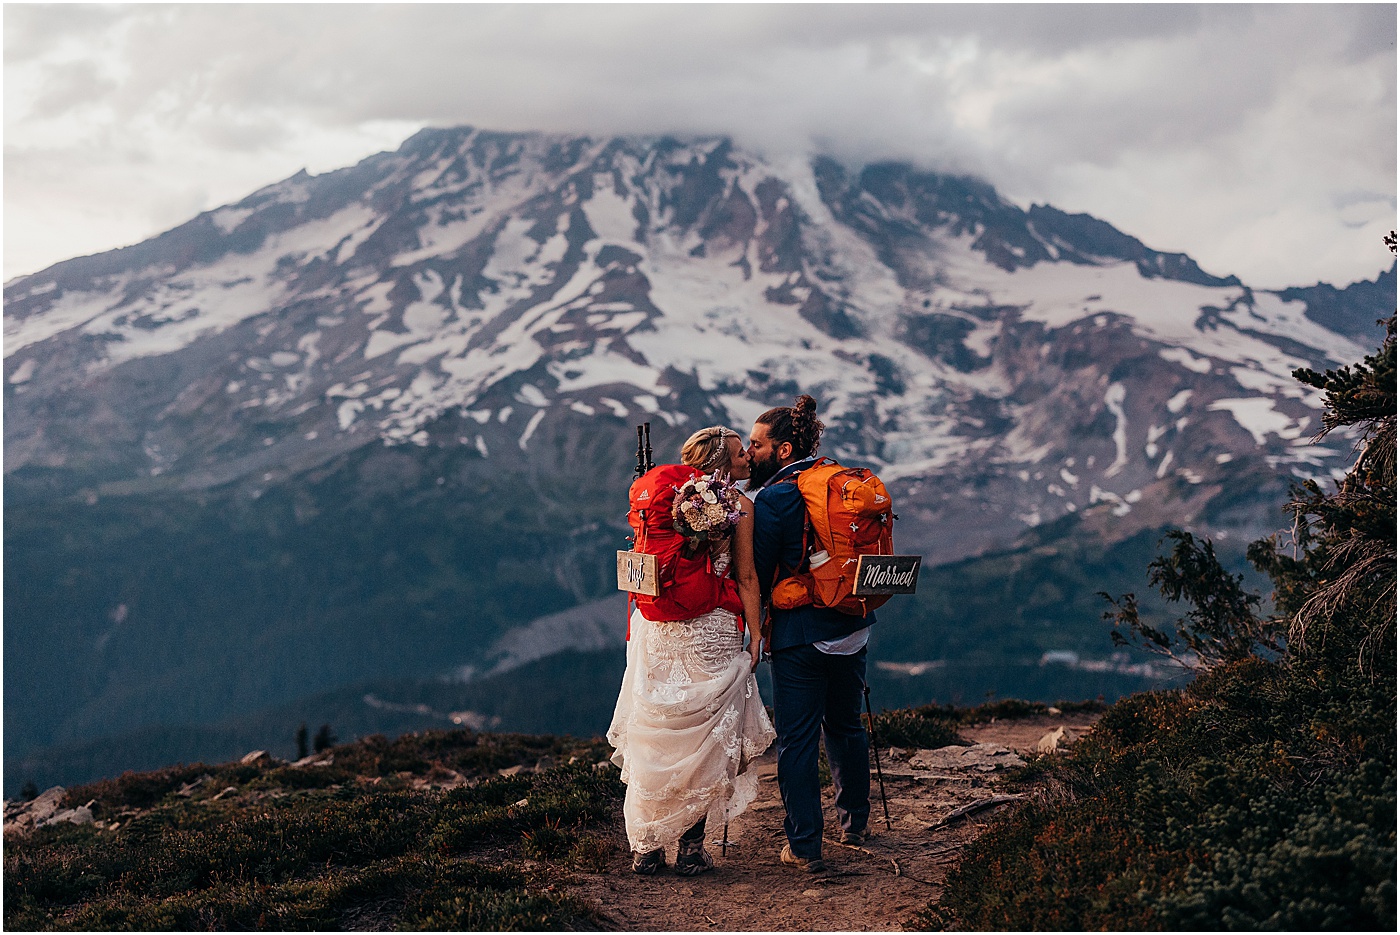 Couple with just married signs standing in front of Mount Rainier | Photo by Megan Montalvo Photography